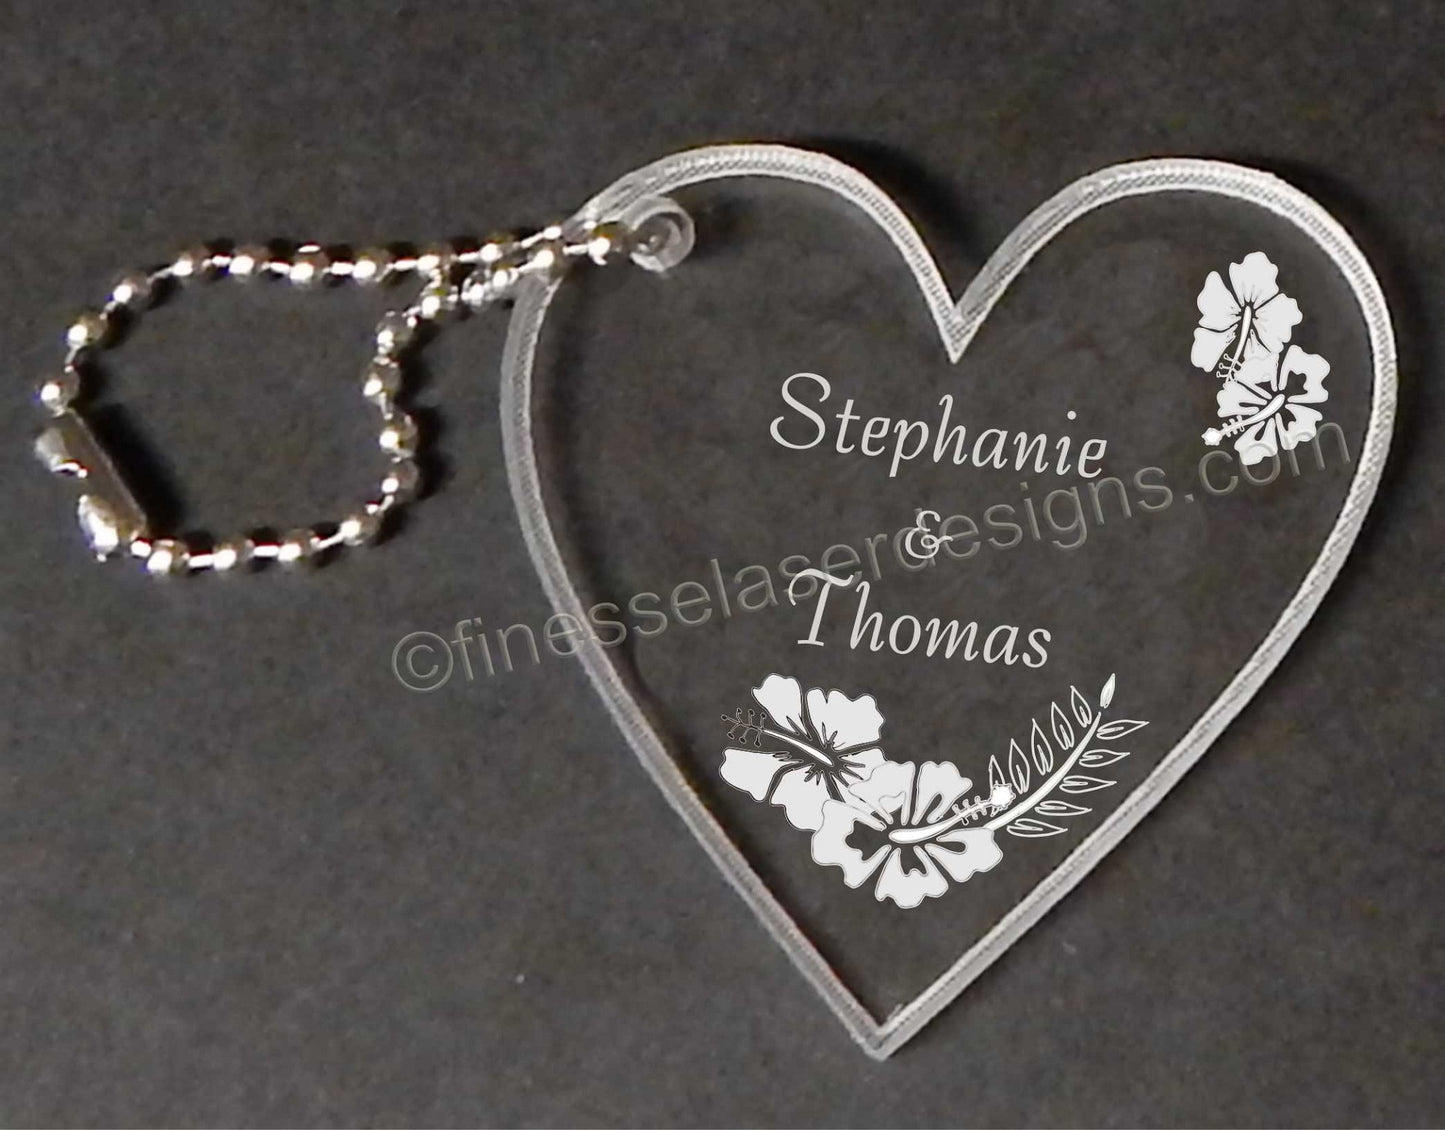 heart shape key chain with hibiscus flower design and named, with a small metal chain attached